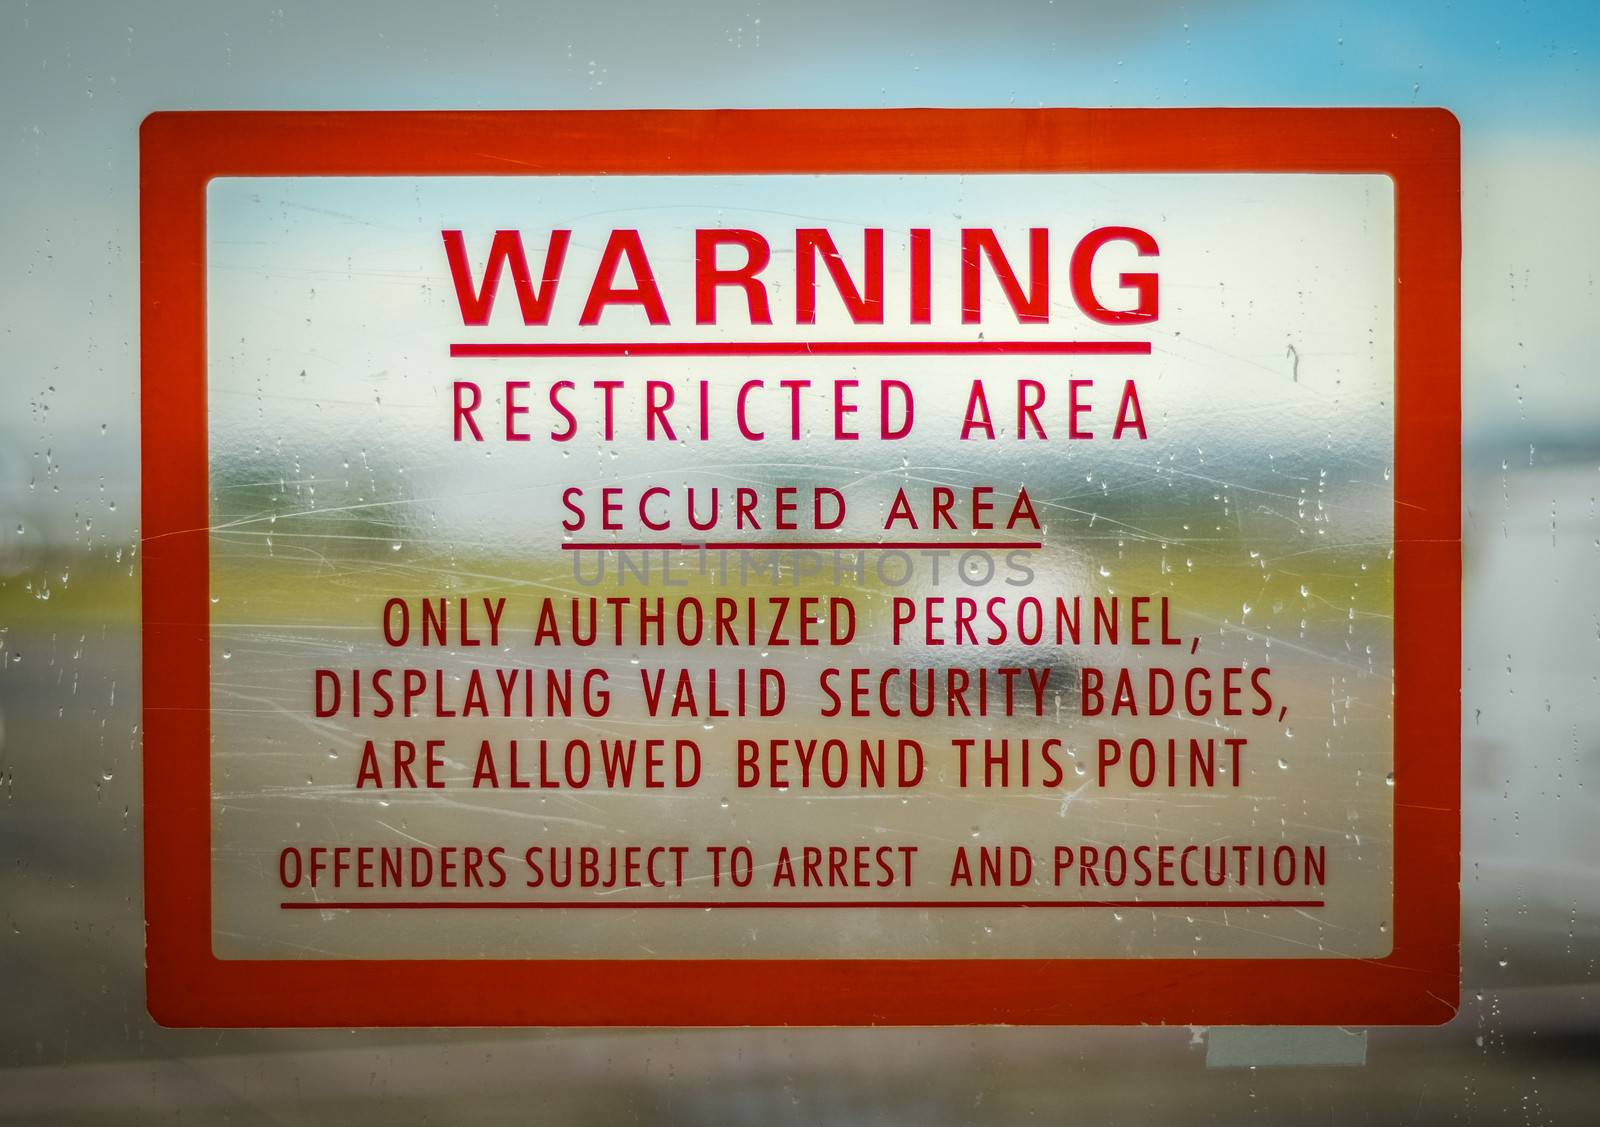 A Red Airport Security Restricted Area Warning Sign